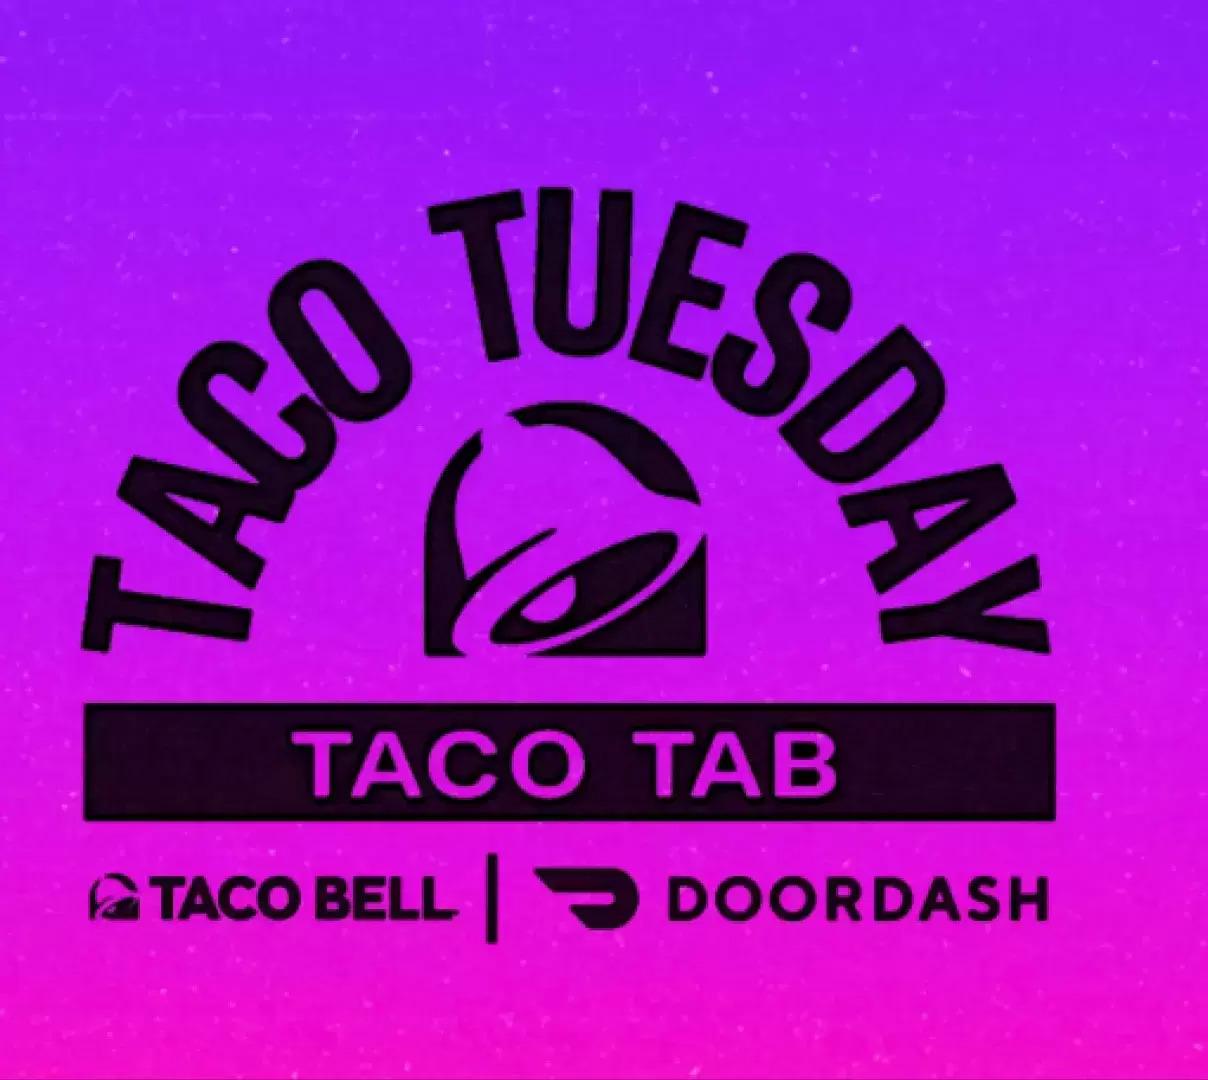 DoorDash Taco Tuesday $12 Off $15 Coupon with Code TACOFEST